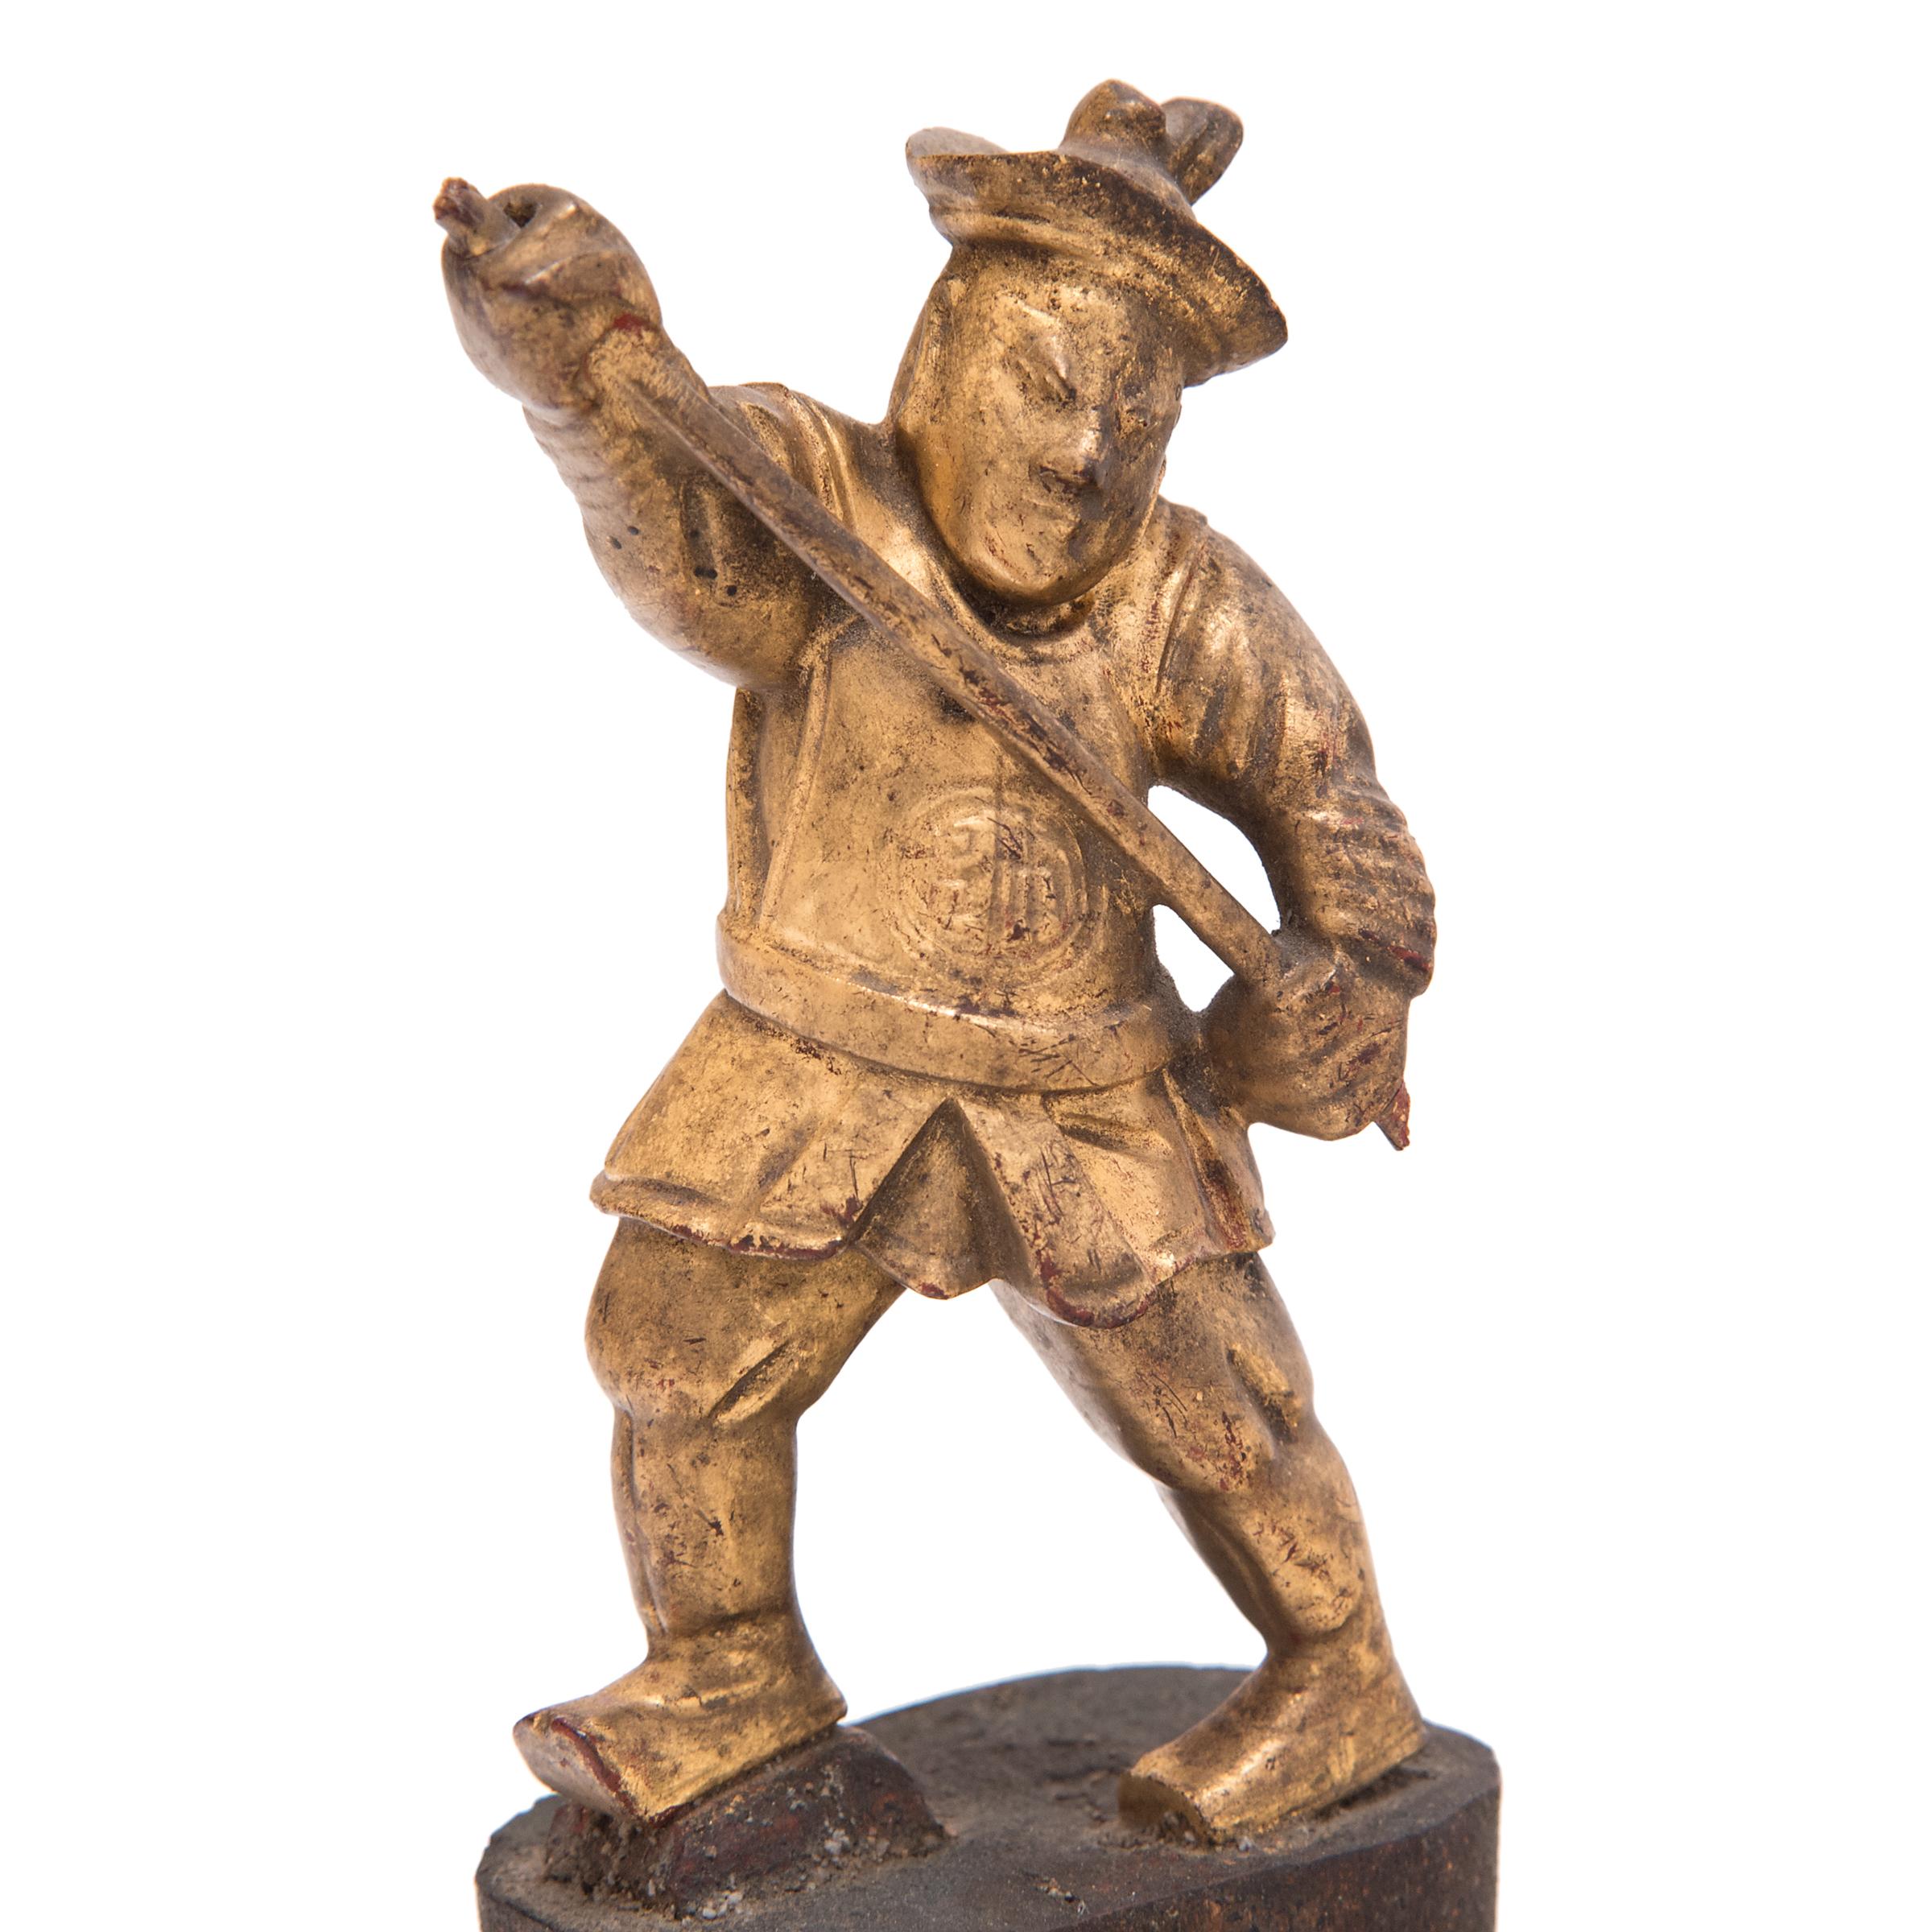 Qing Chinese Gilt Soldier Figurine, c. 1700